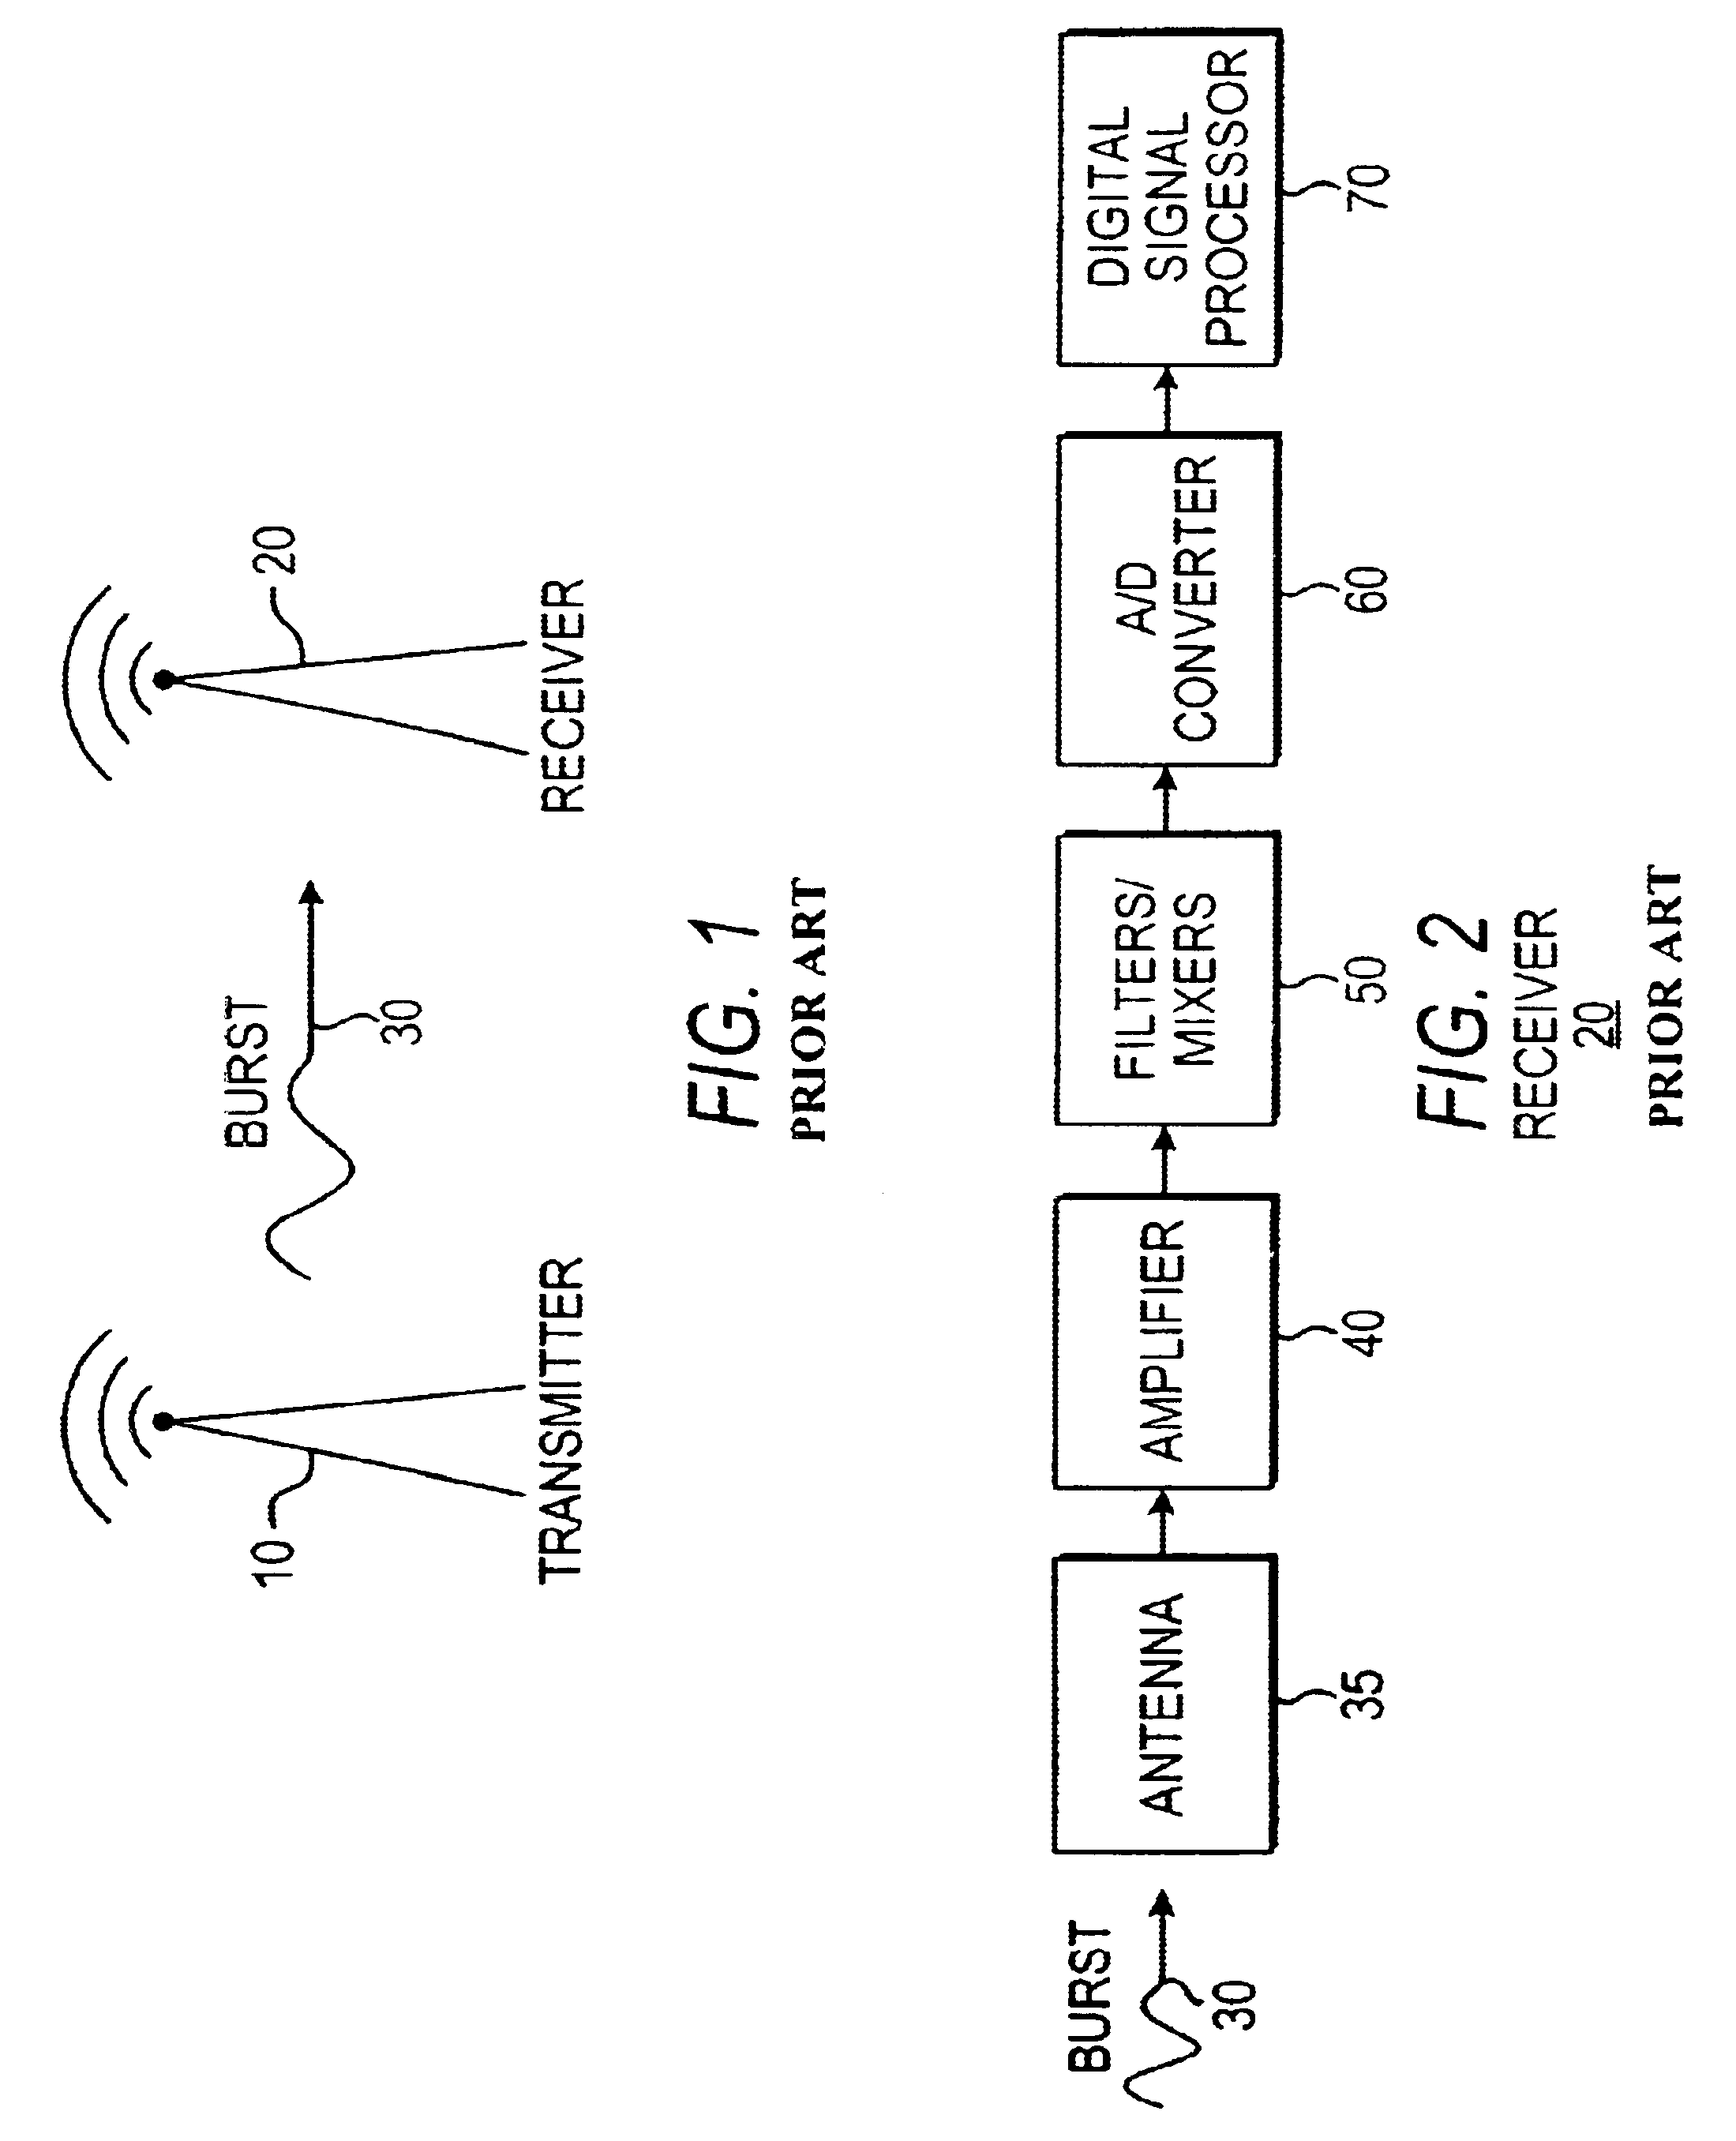 Method for automatic frequency control